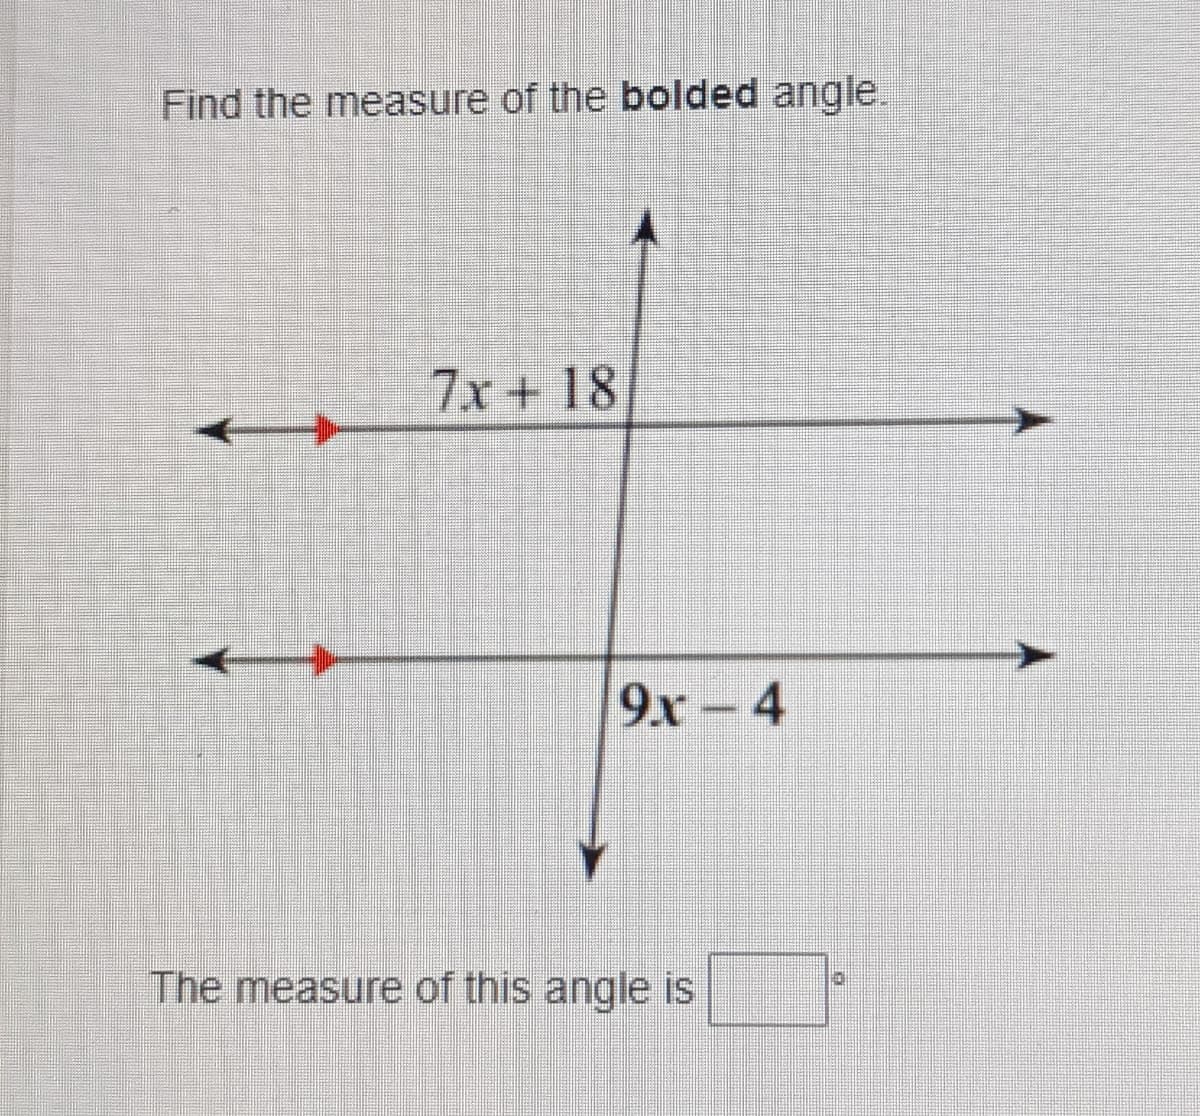 Find the measure of the bolded angle.
7x + 18
9x-4
The measure of this angle is
